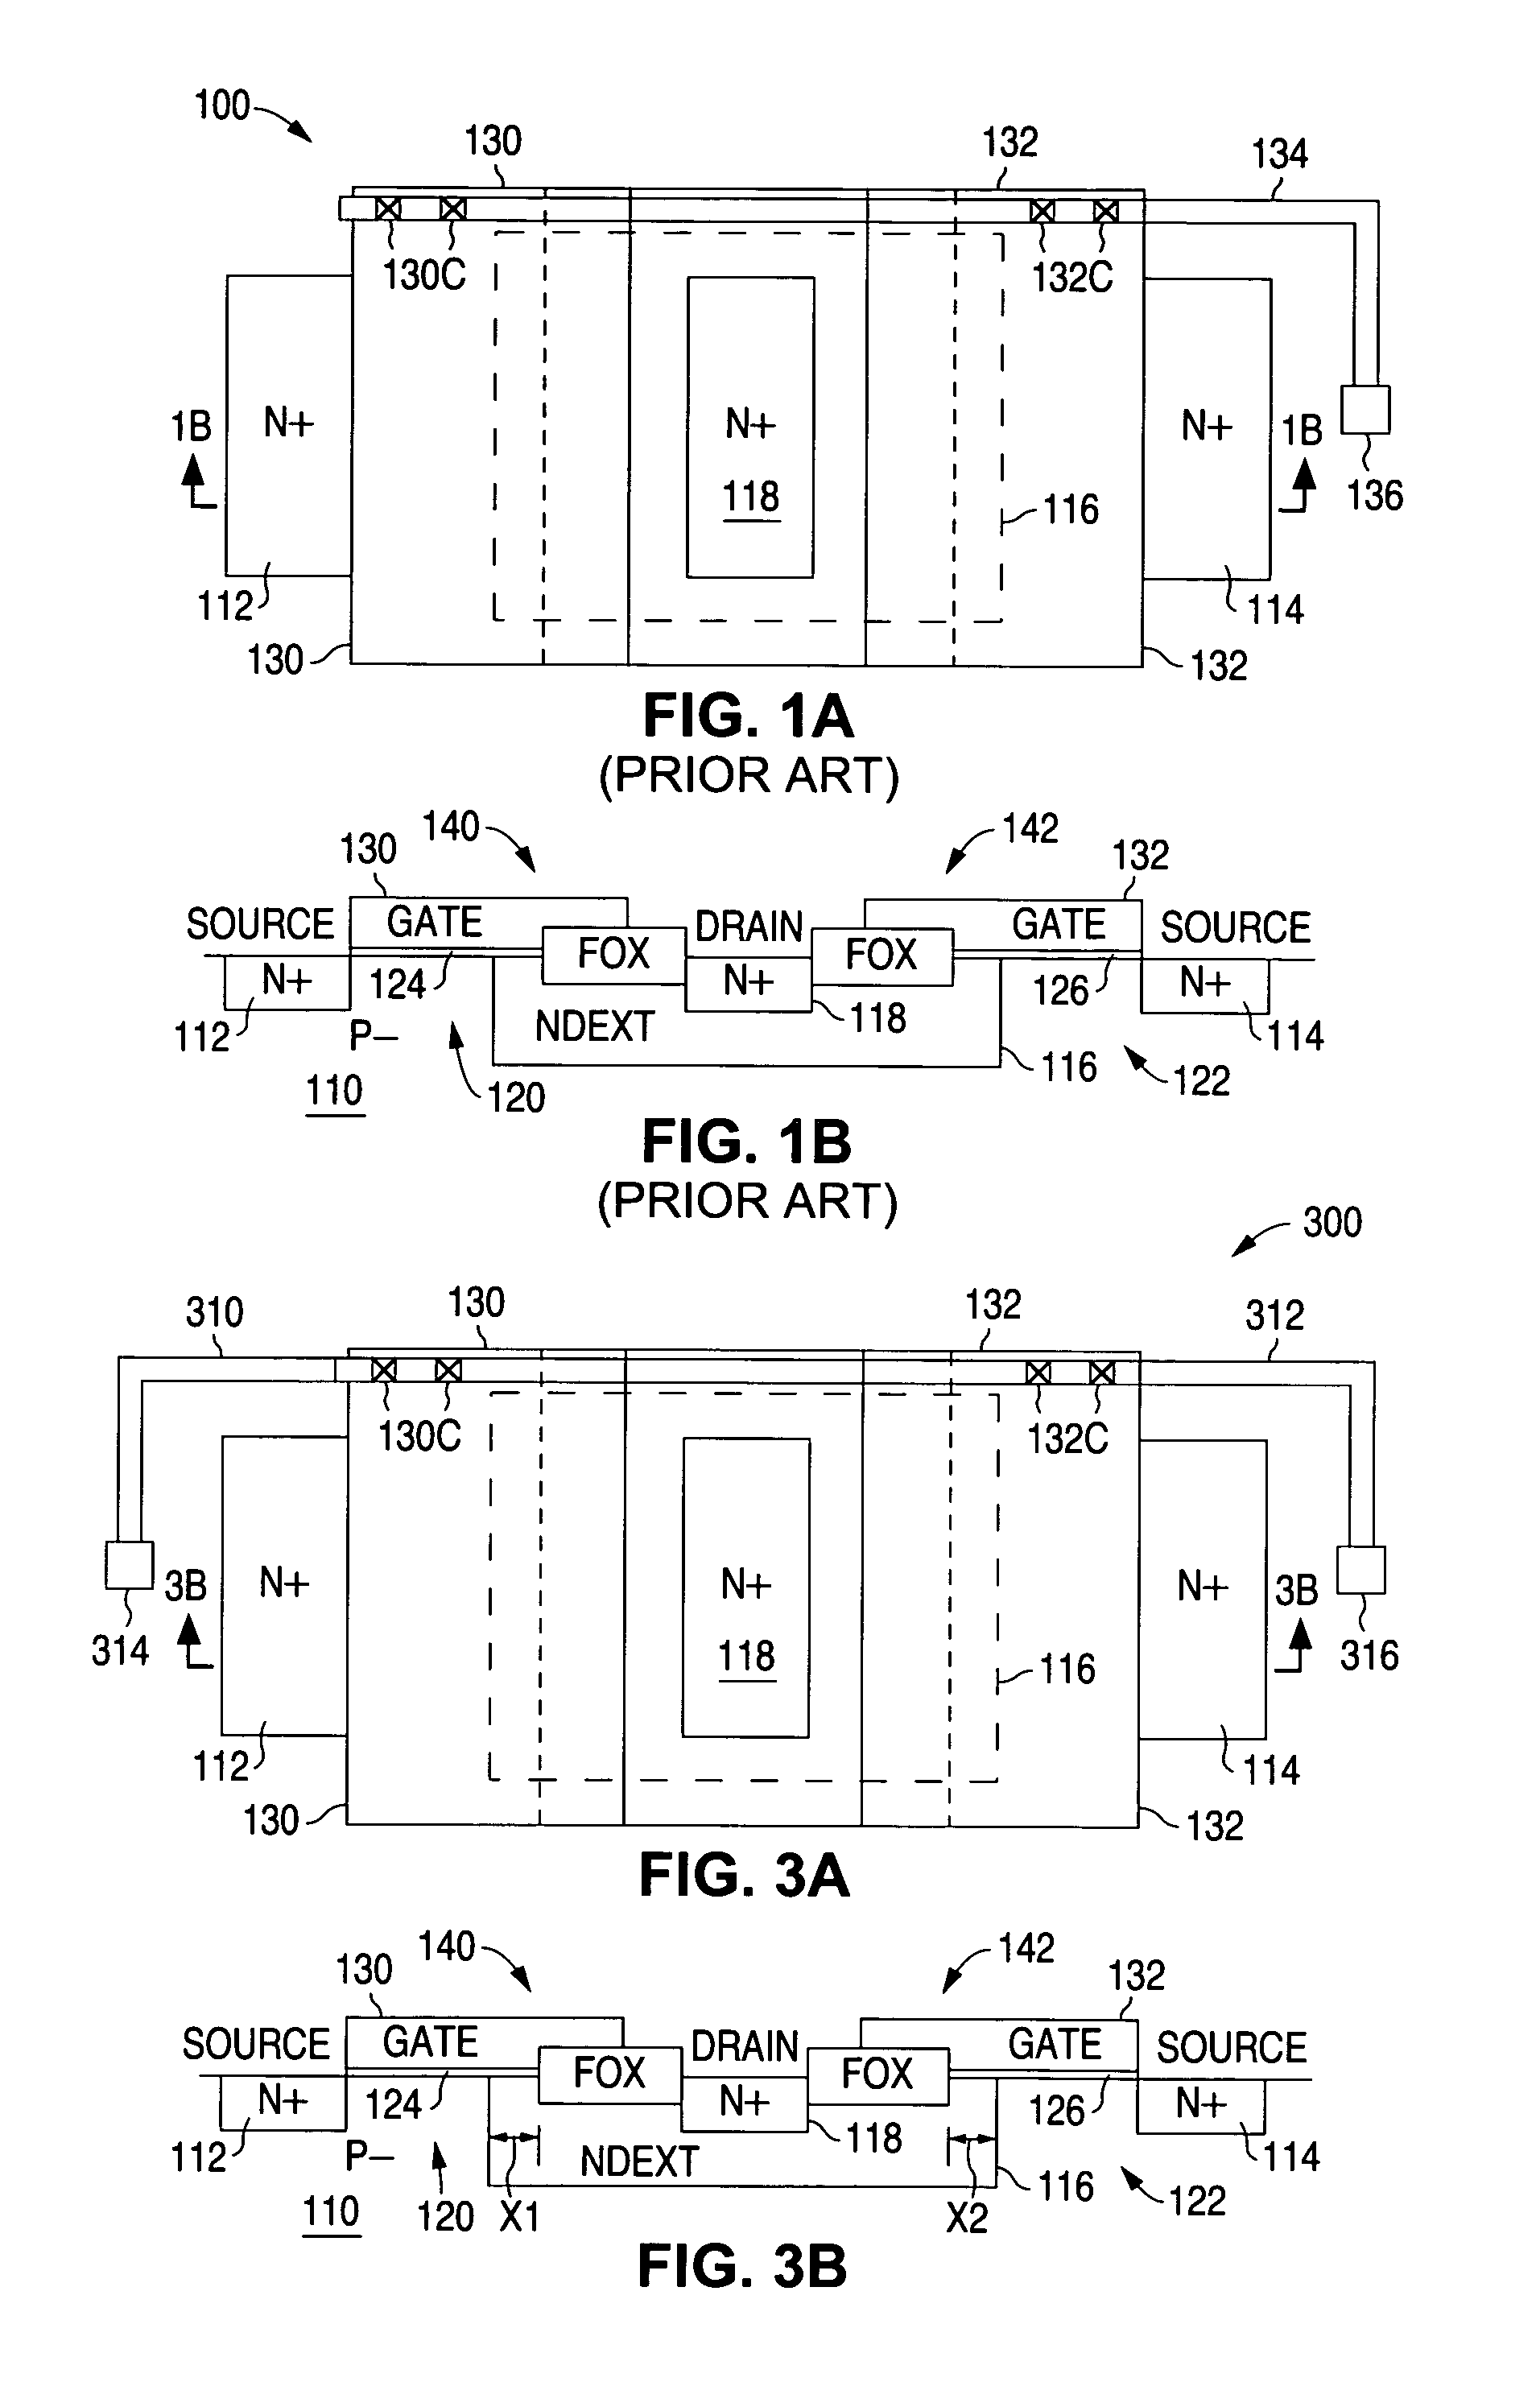 Method of monitoring process misalignment to reduce asymmetric device operation and improve the electrical and hot carrier performance of LDMOS transistor arrays